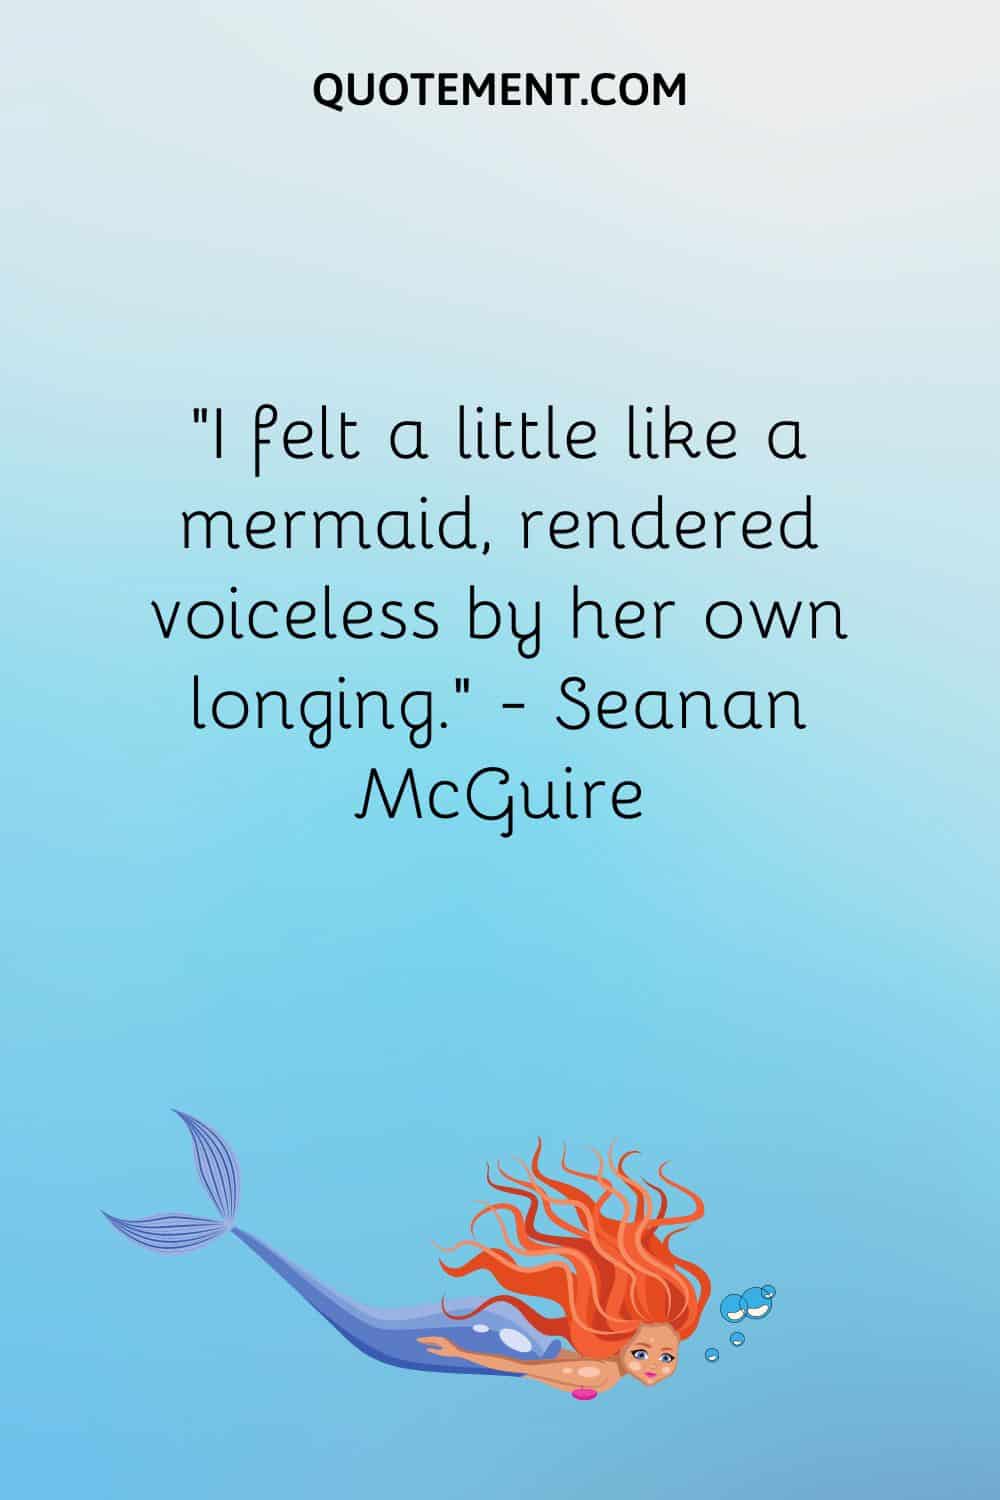 “I felt a little like a mermaid, rendered voiceless by her own longing.” — Seanan McGuire